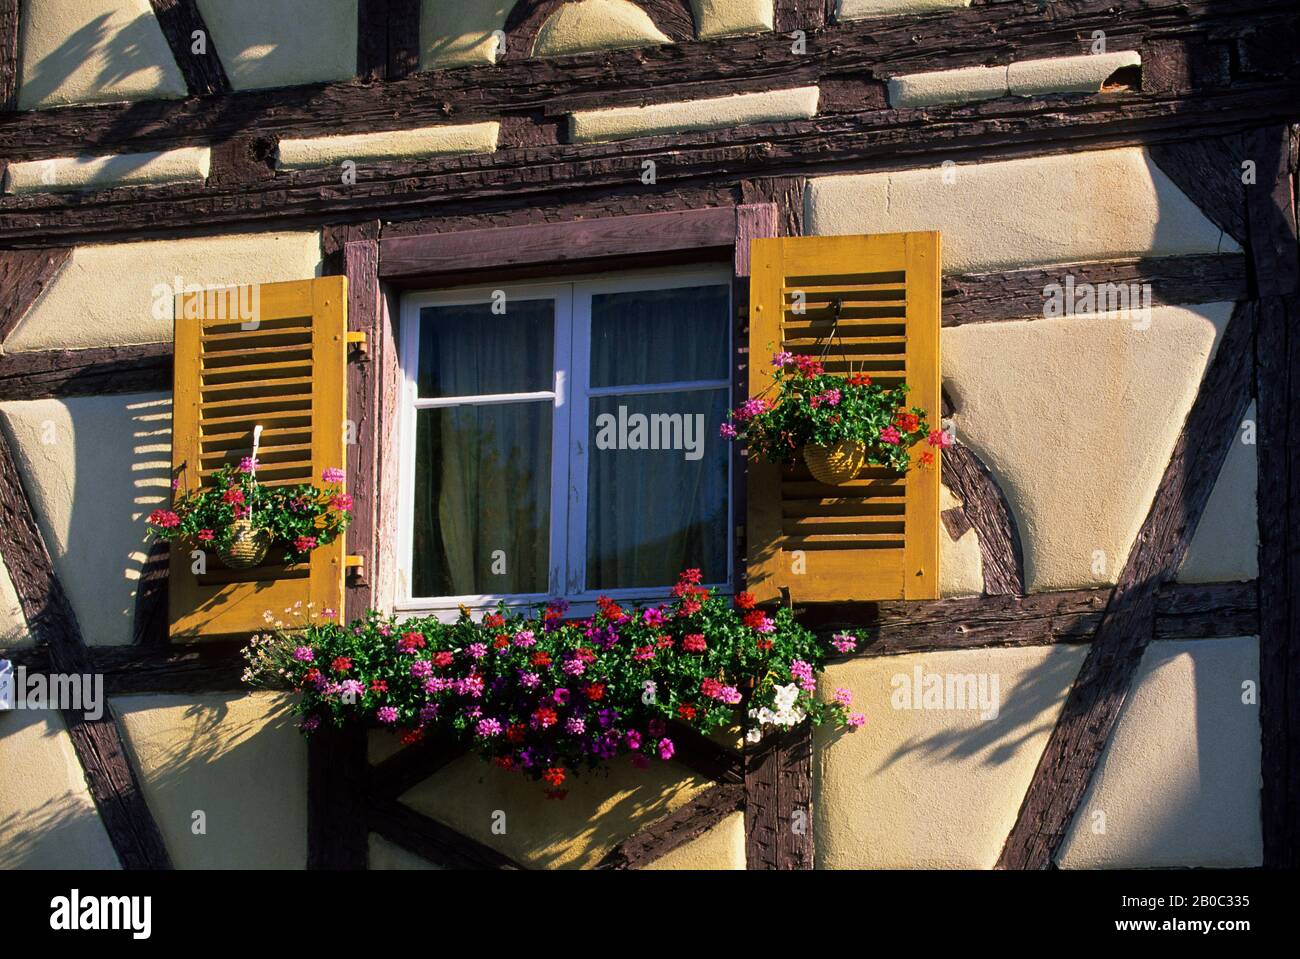 FRANCE, COLMAR, HALFTIMBERED HOUSE, WINDOW WITH FLOWERS Stock Photo